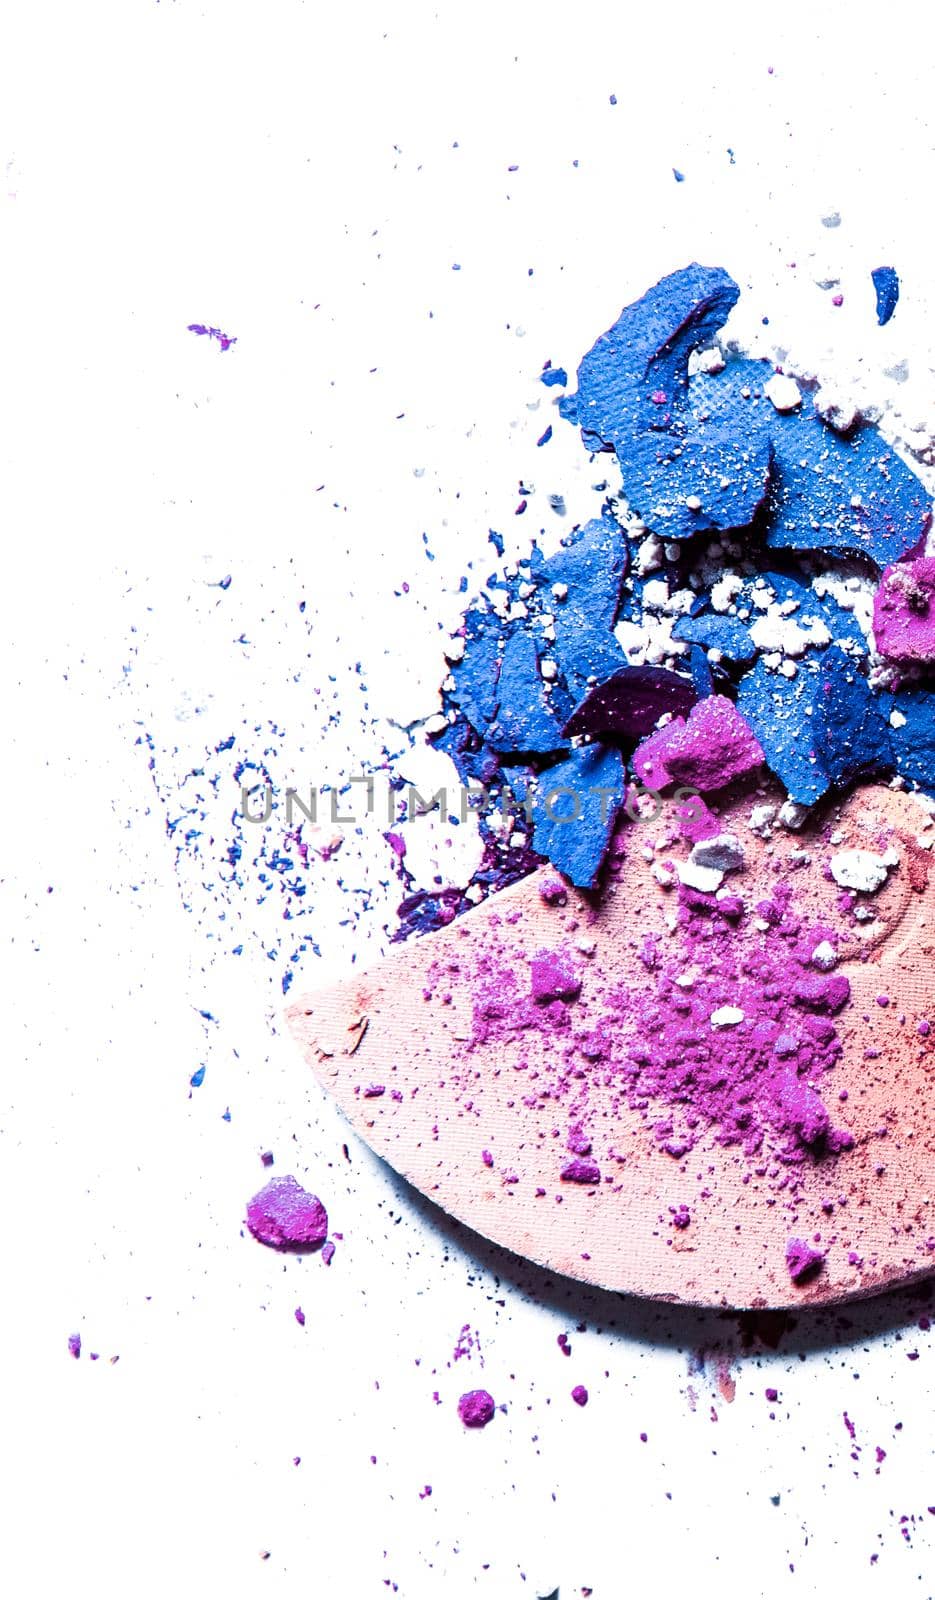 Crushed eyeshadow palette and powder close-up isolated on white background by Anneleven